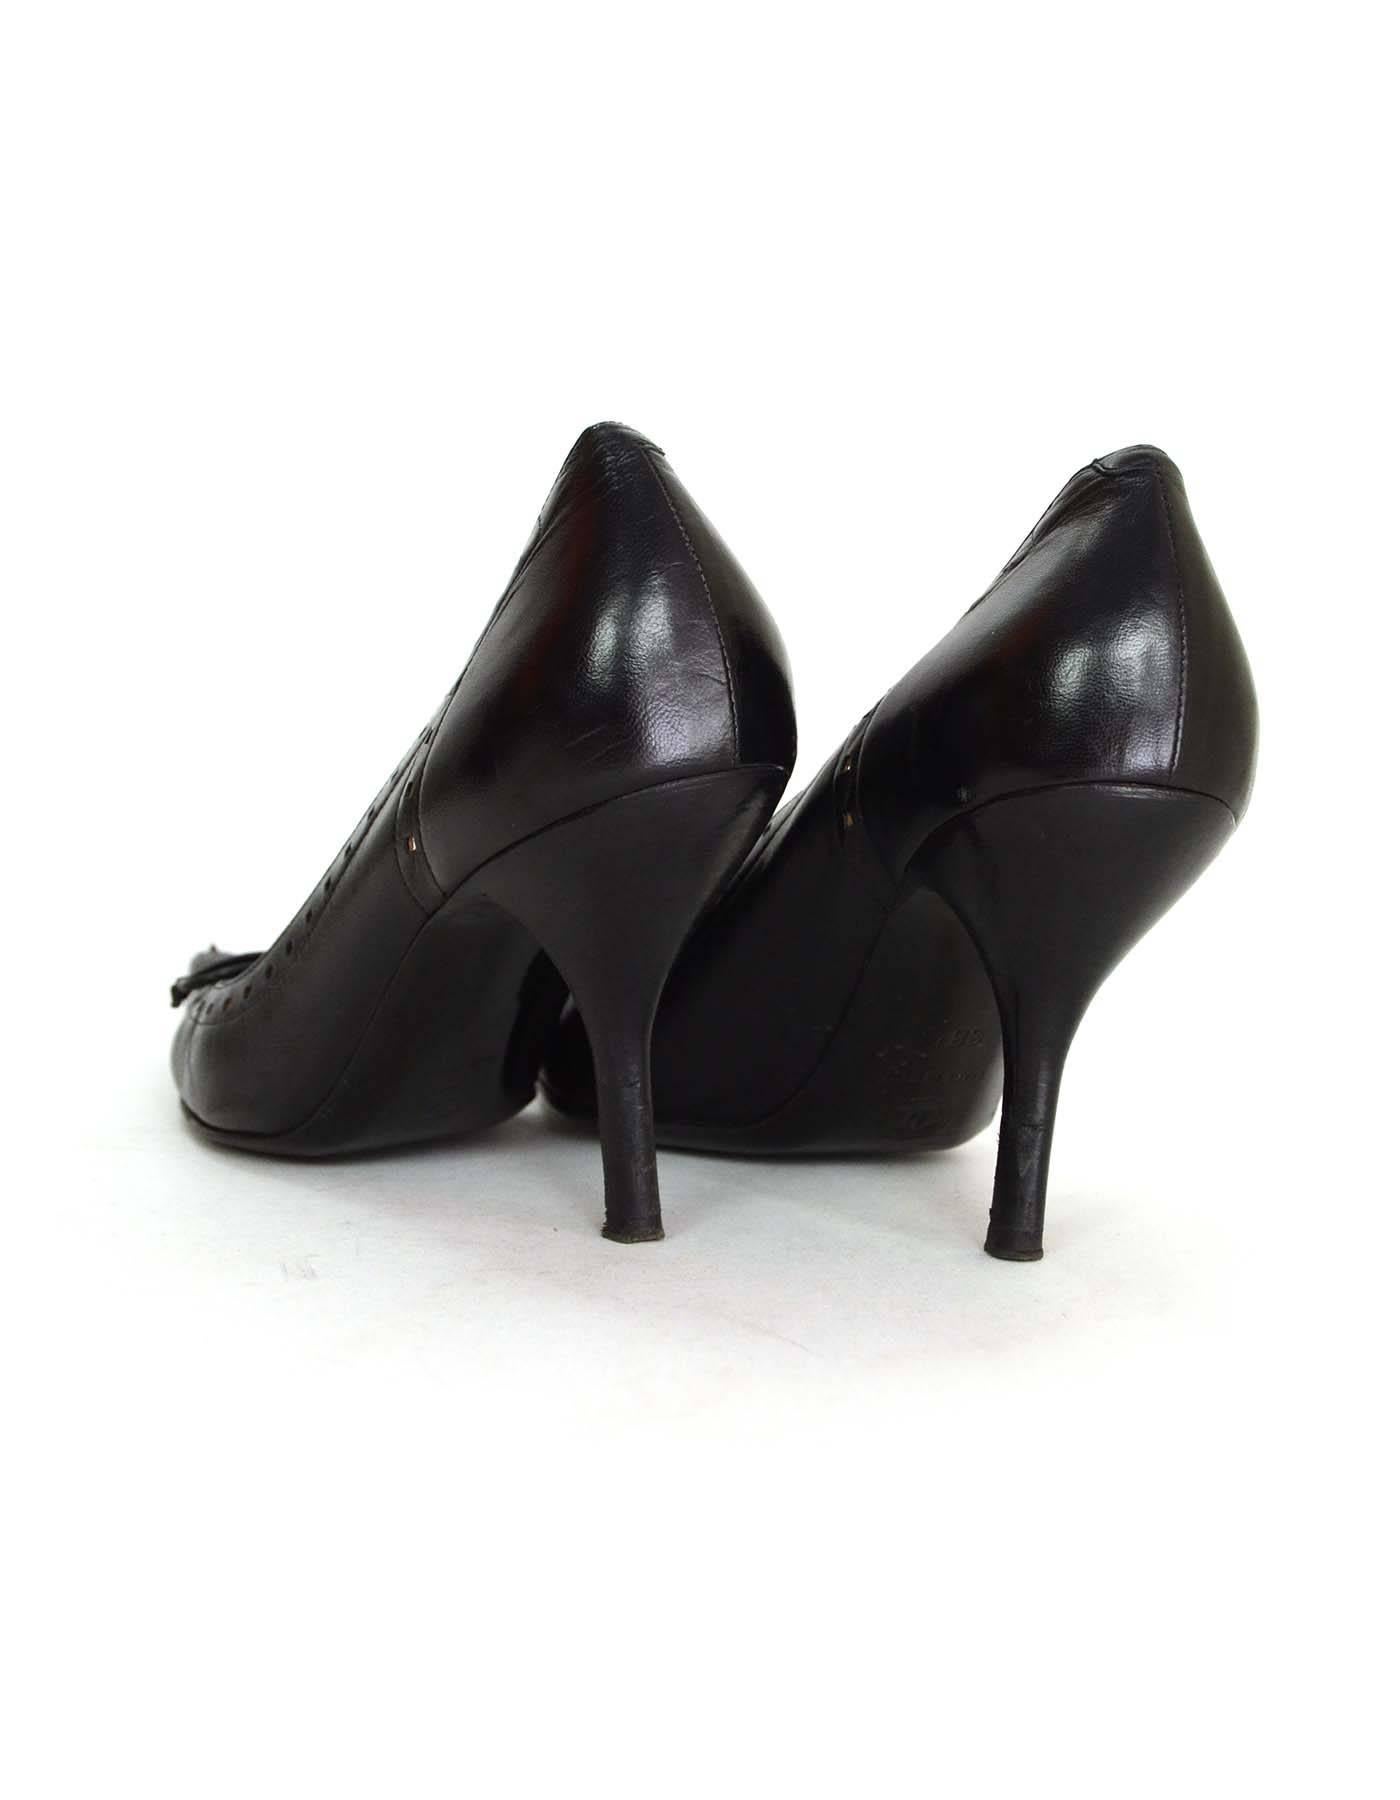 Chanel Perforated Black Pointed Toe Pumps Sz 38.5 1